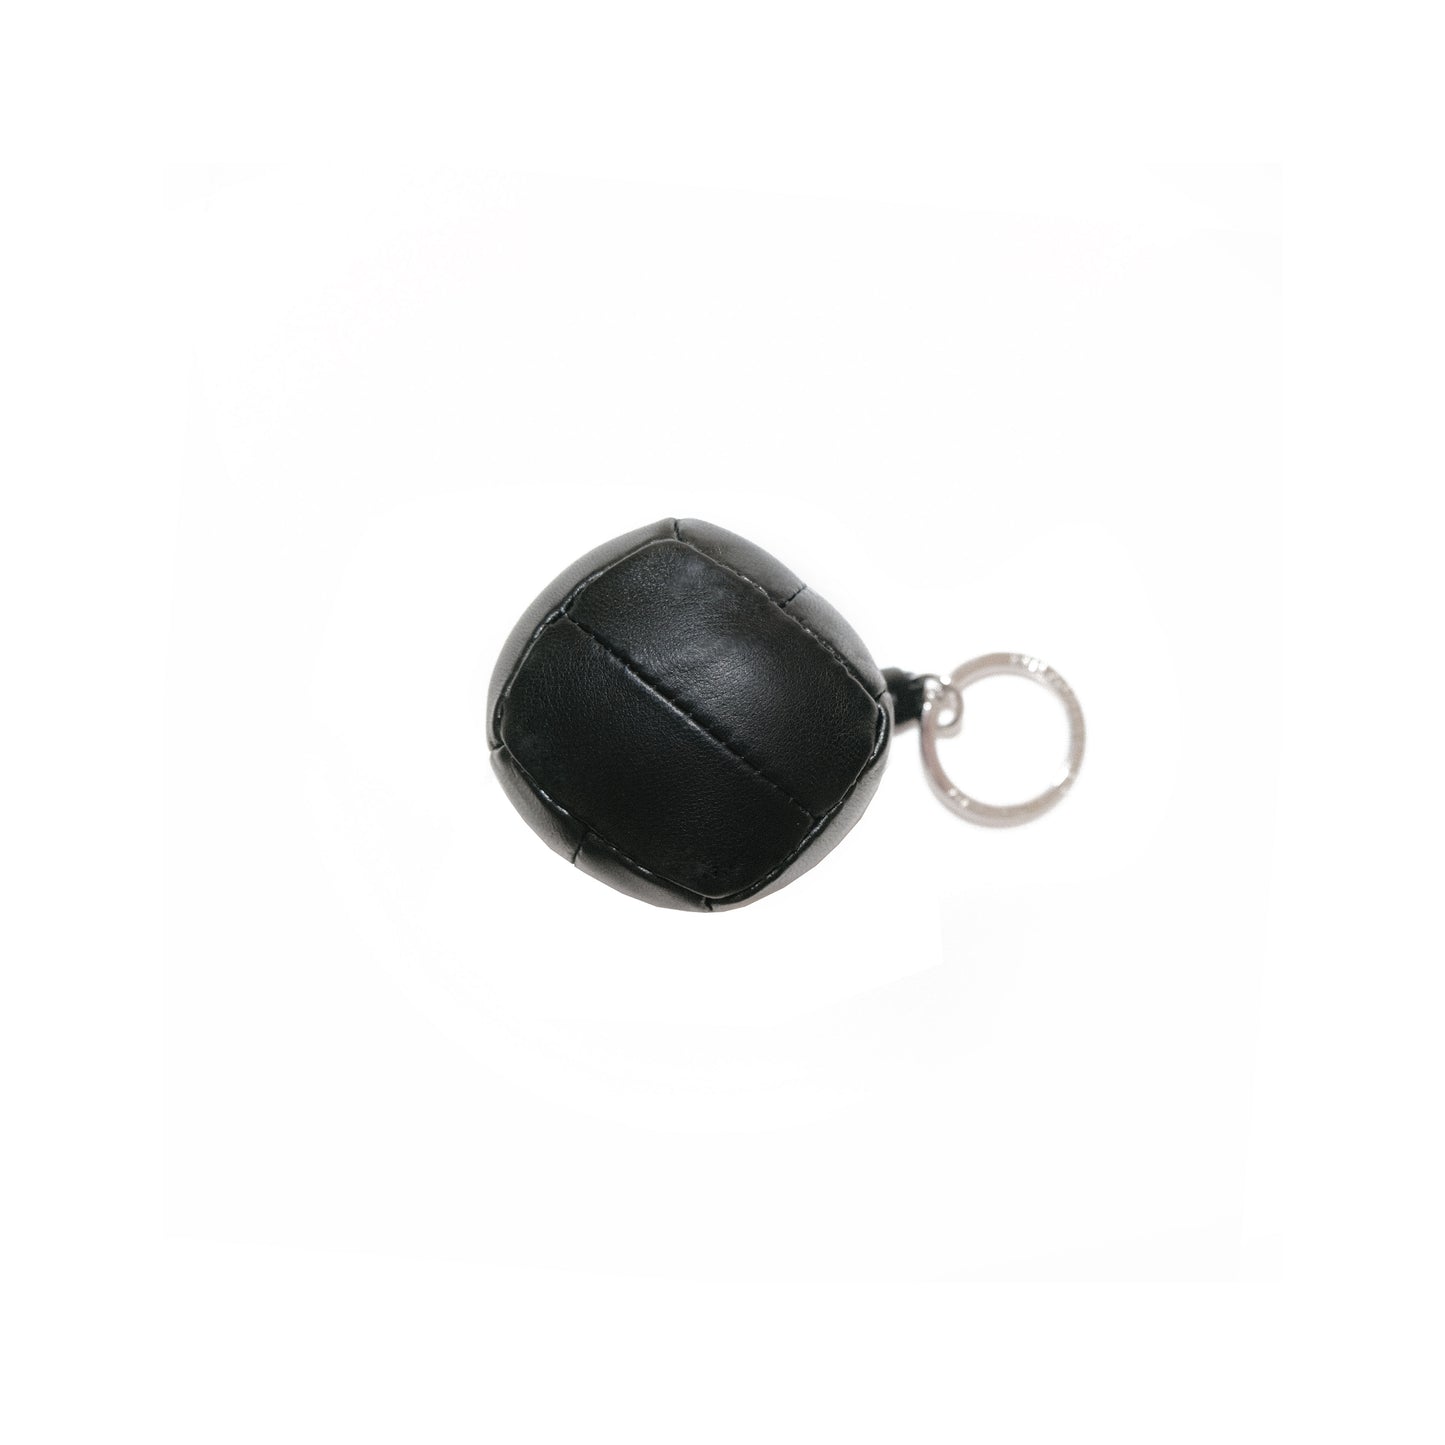 Ettore Downfilled Key Chain black